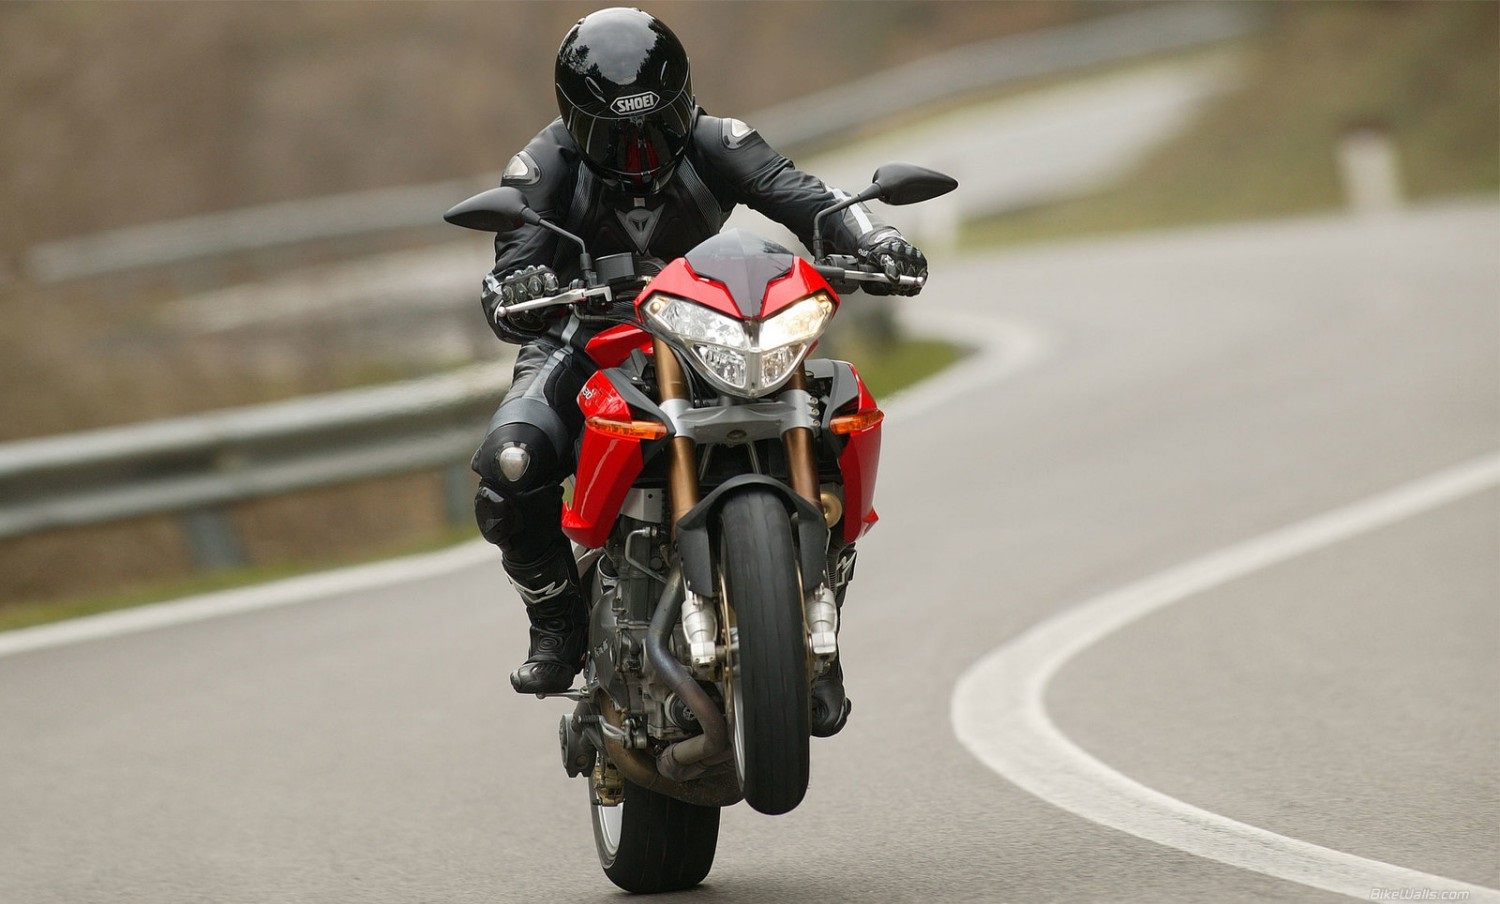 Motorcycle Safety and Legal Obligations for Riders